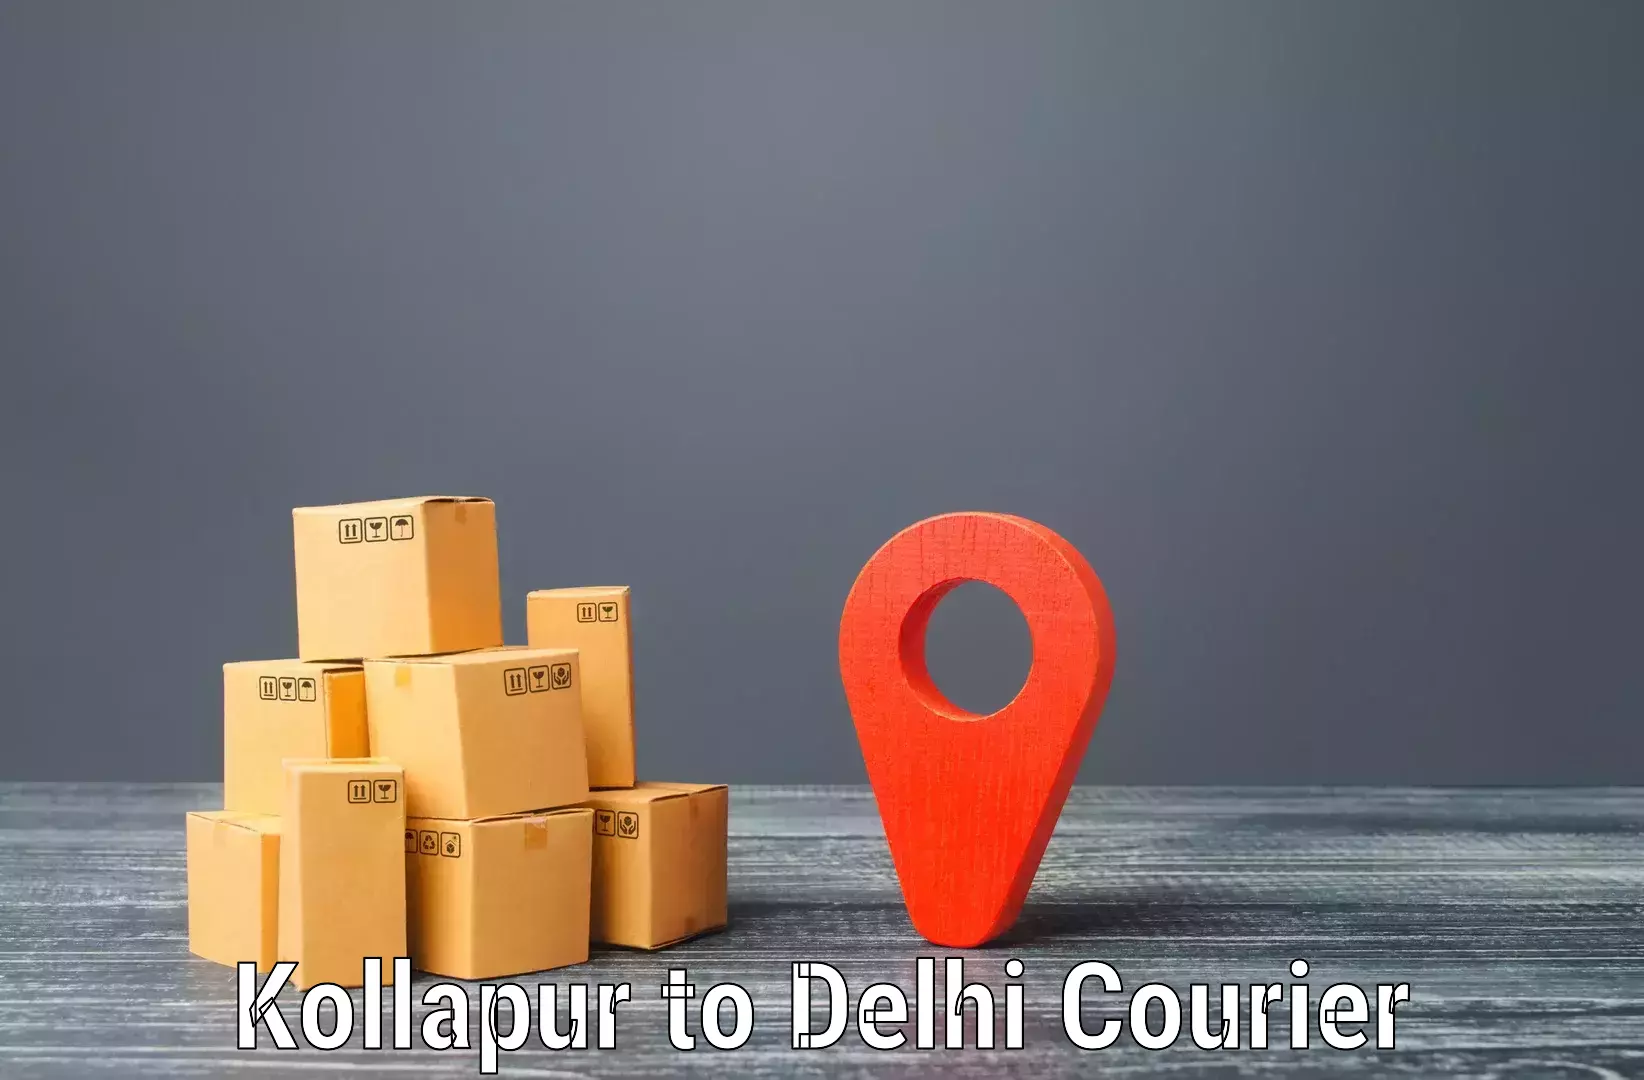 Overnight delivery services Kollapur to University of Delhi